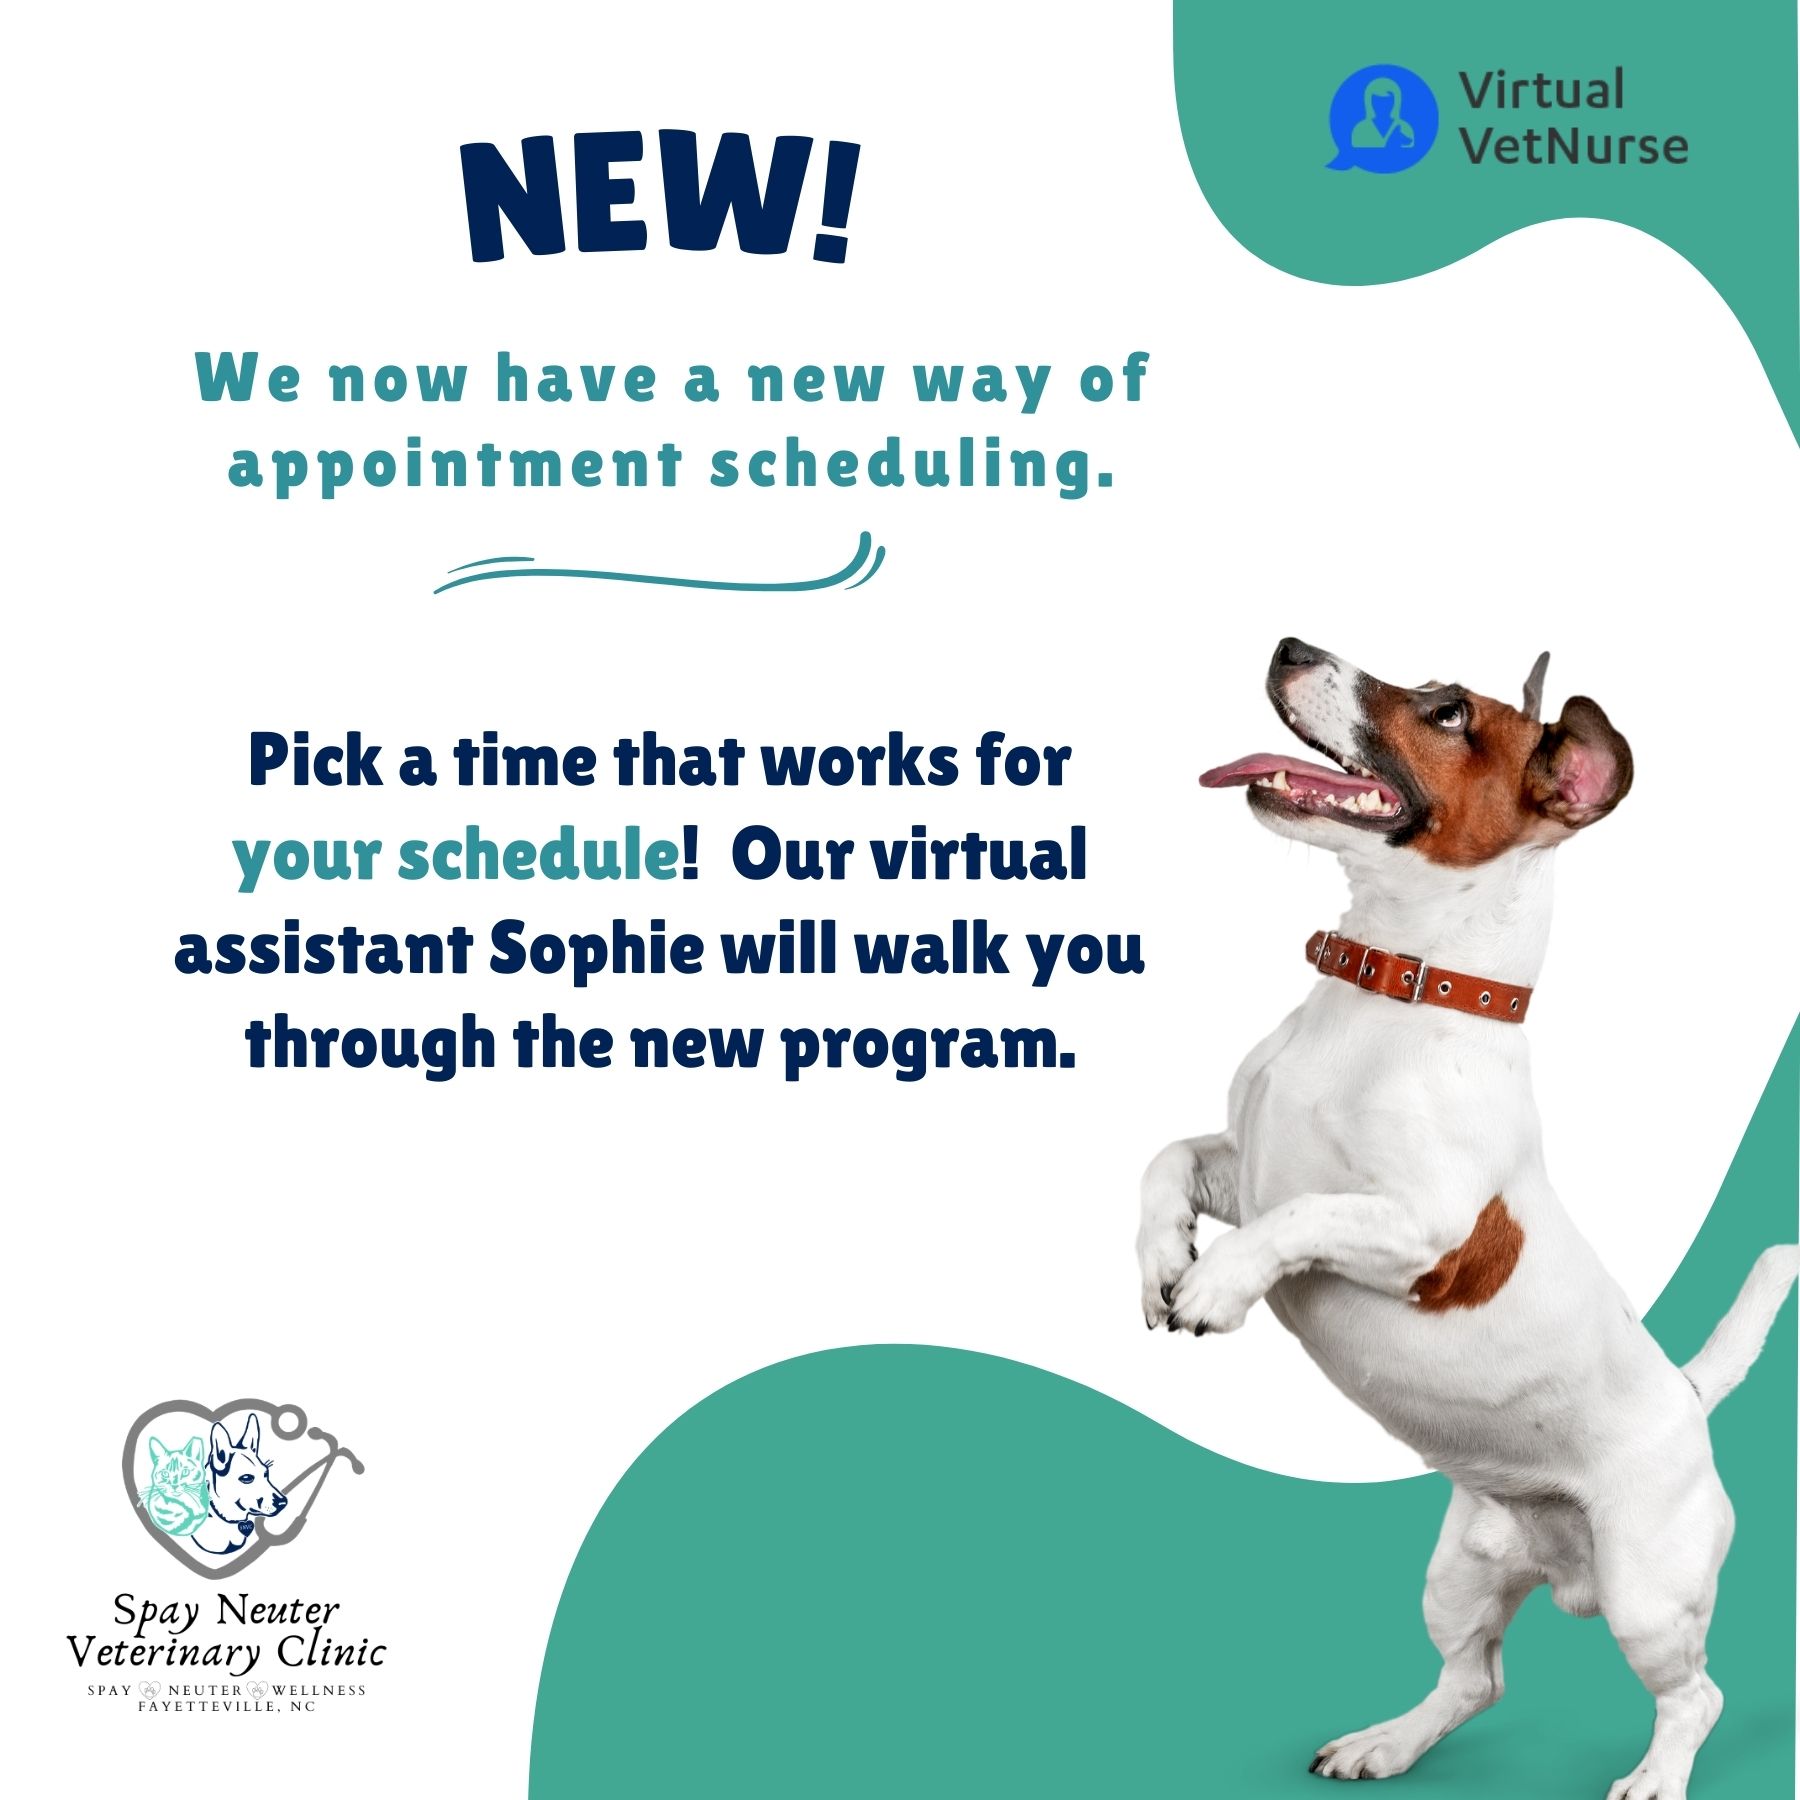 New virtual assistant